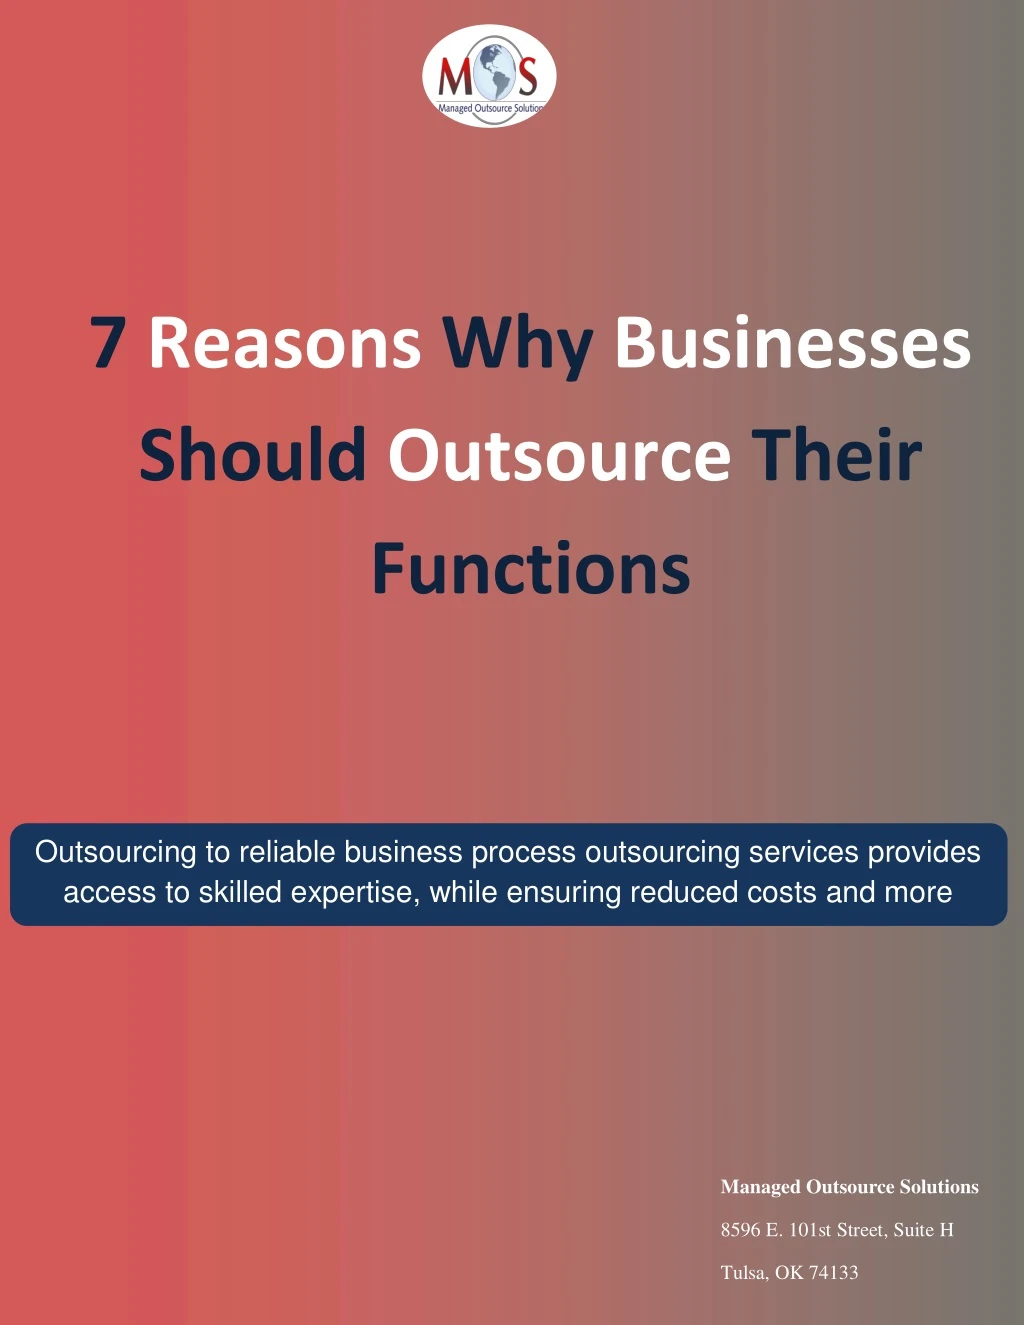 7 reasons why businesses should outsource their